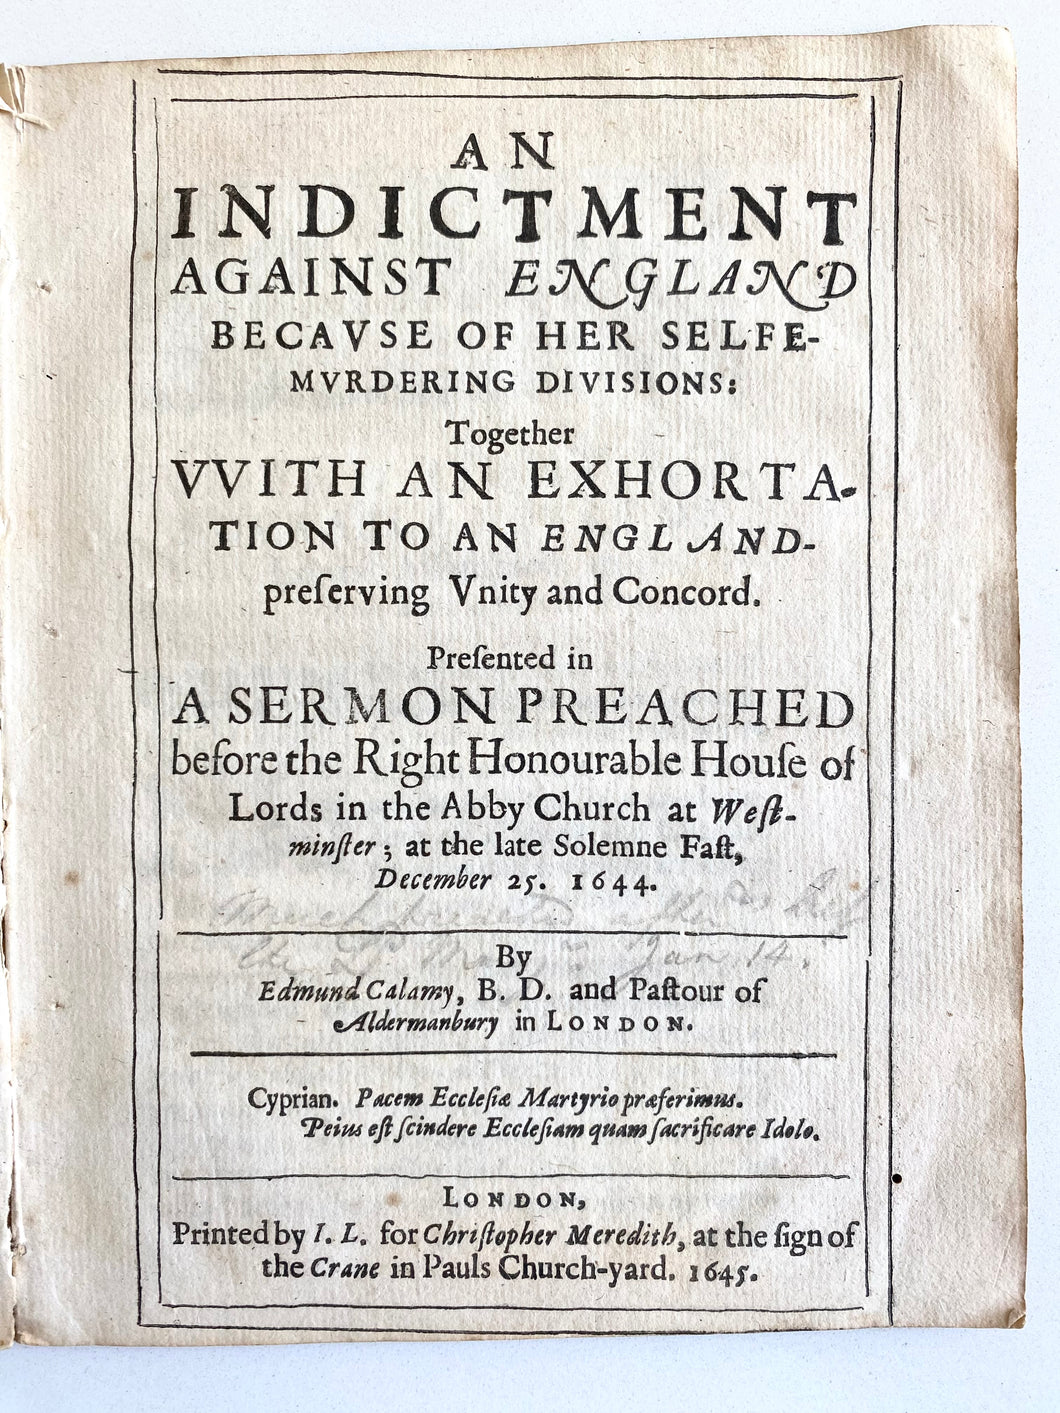 1645 EDMUND CALAMY. Westminster Assembly Puritan Argues Against Exclusive Christian Government - And Against Christmas!